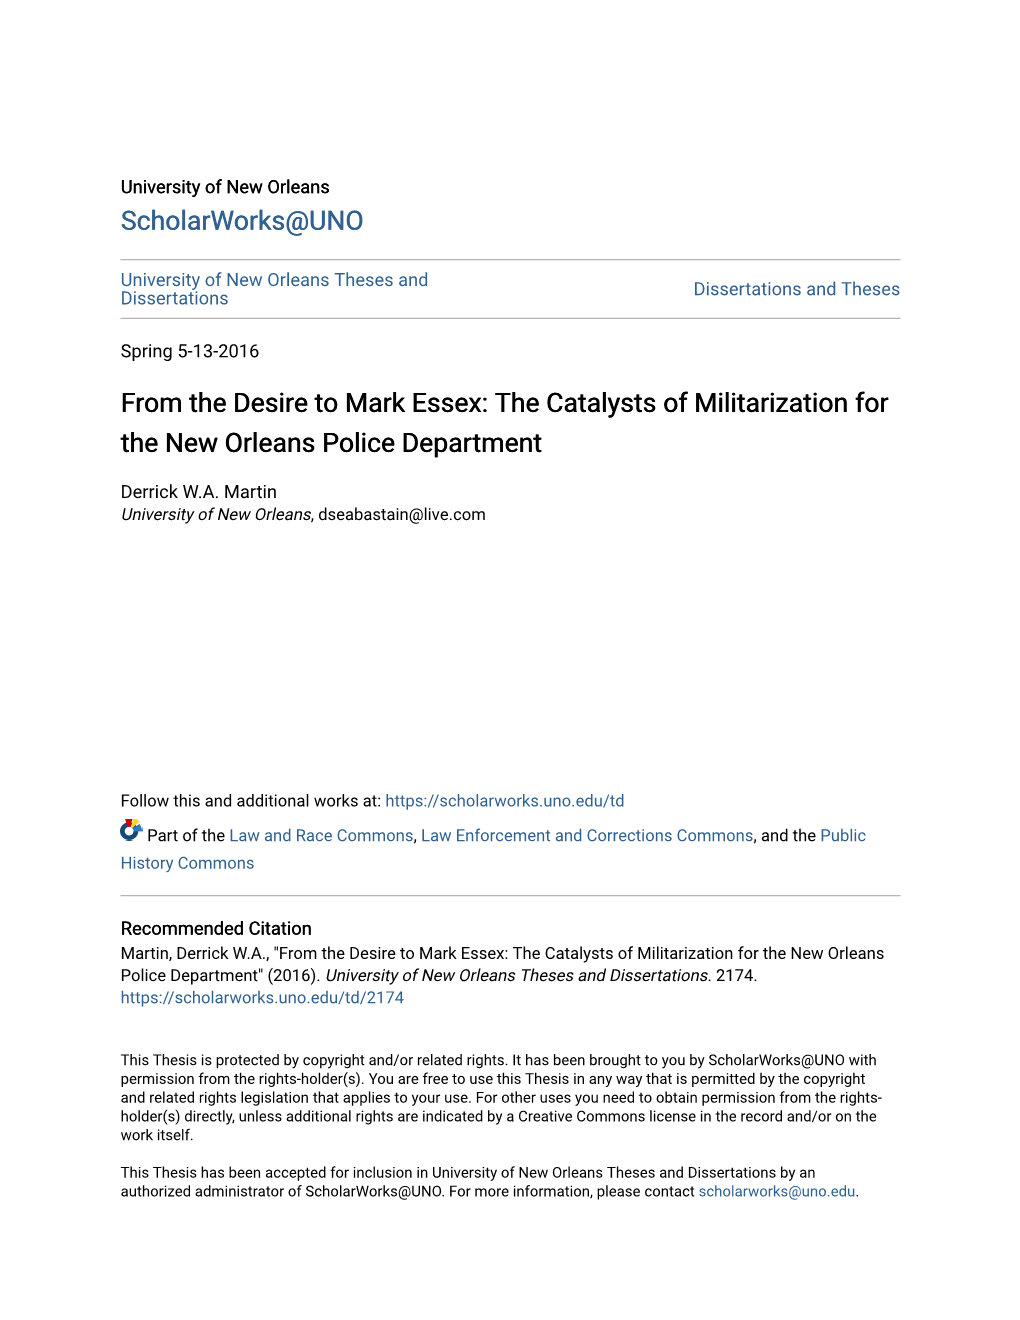 From the Desire to Mark Essex: the Catalysts of Militarization for the New Orleans Police Department